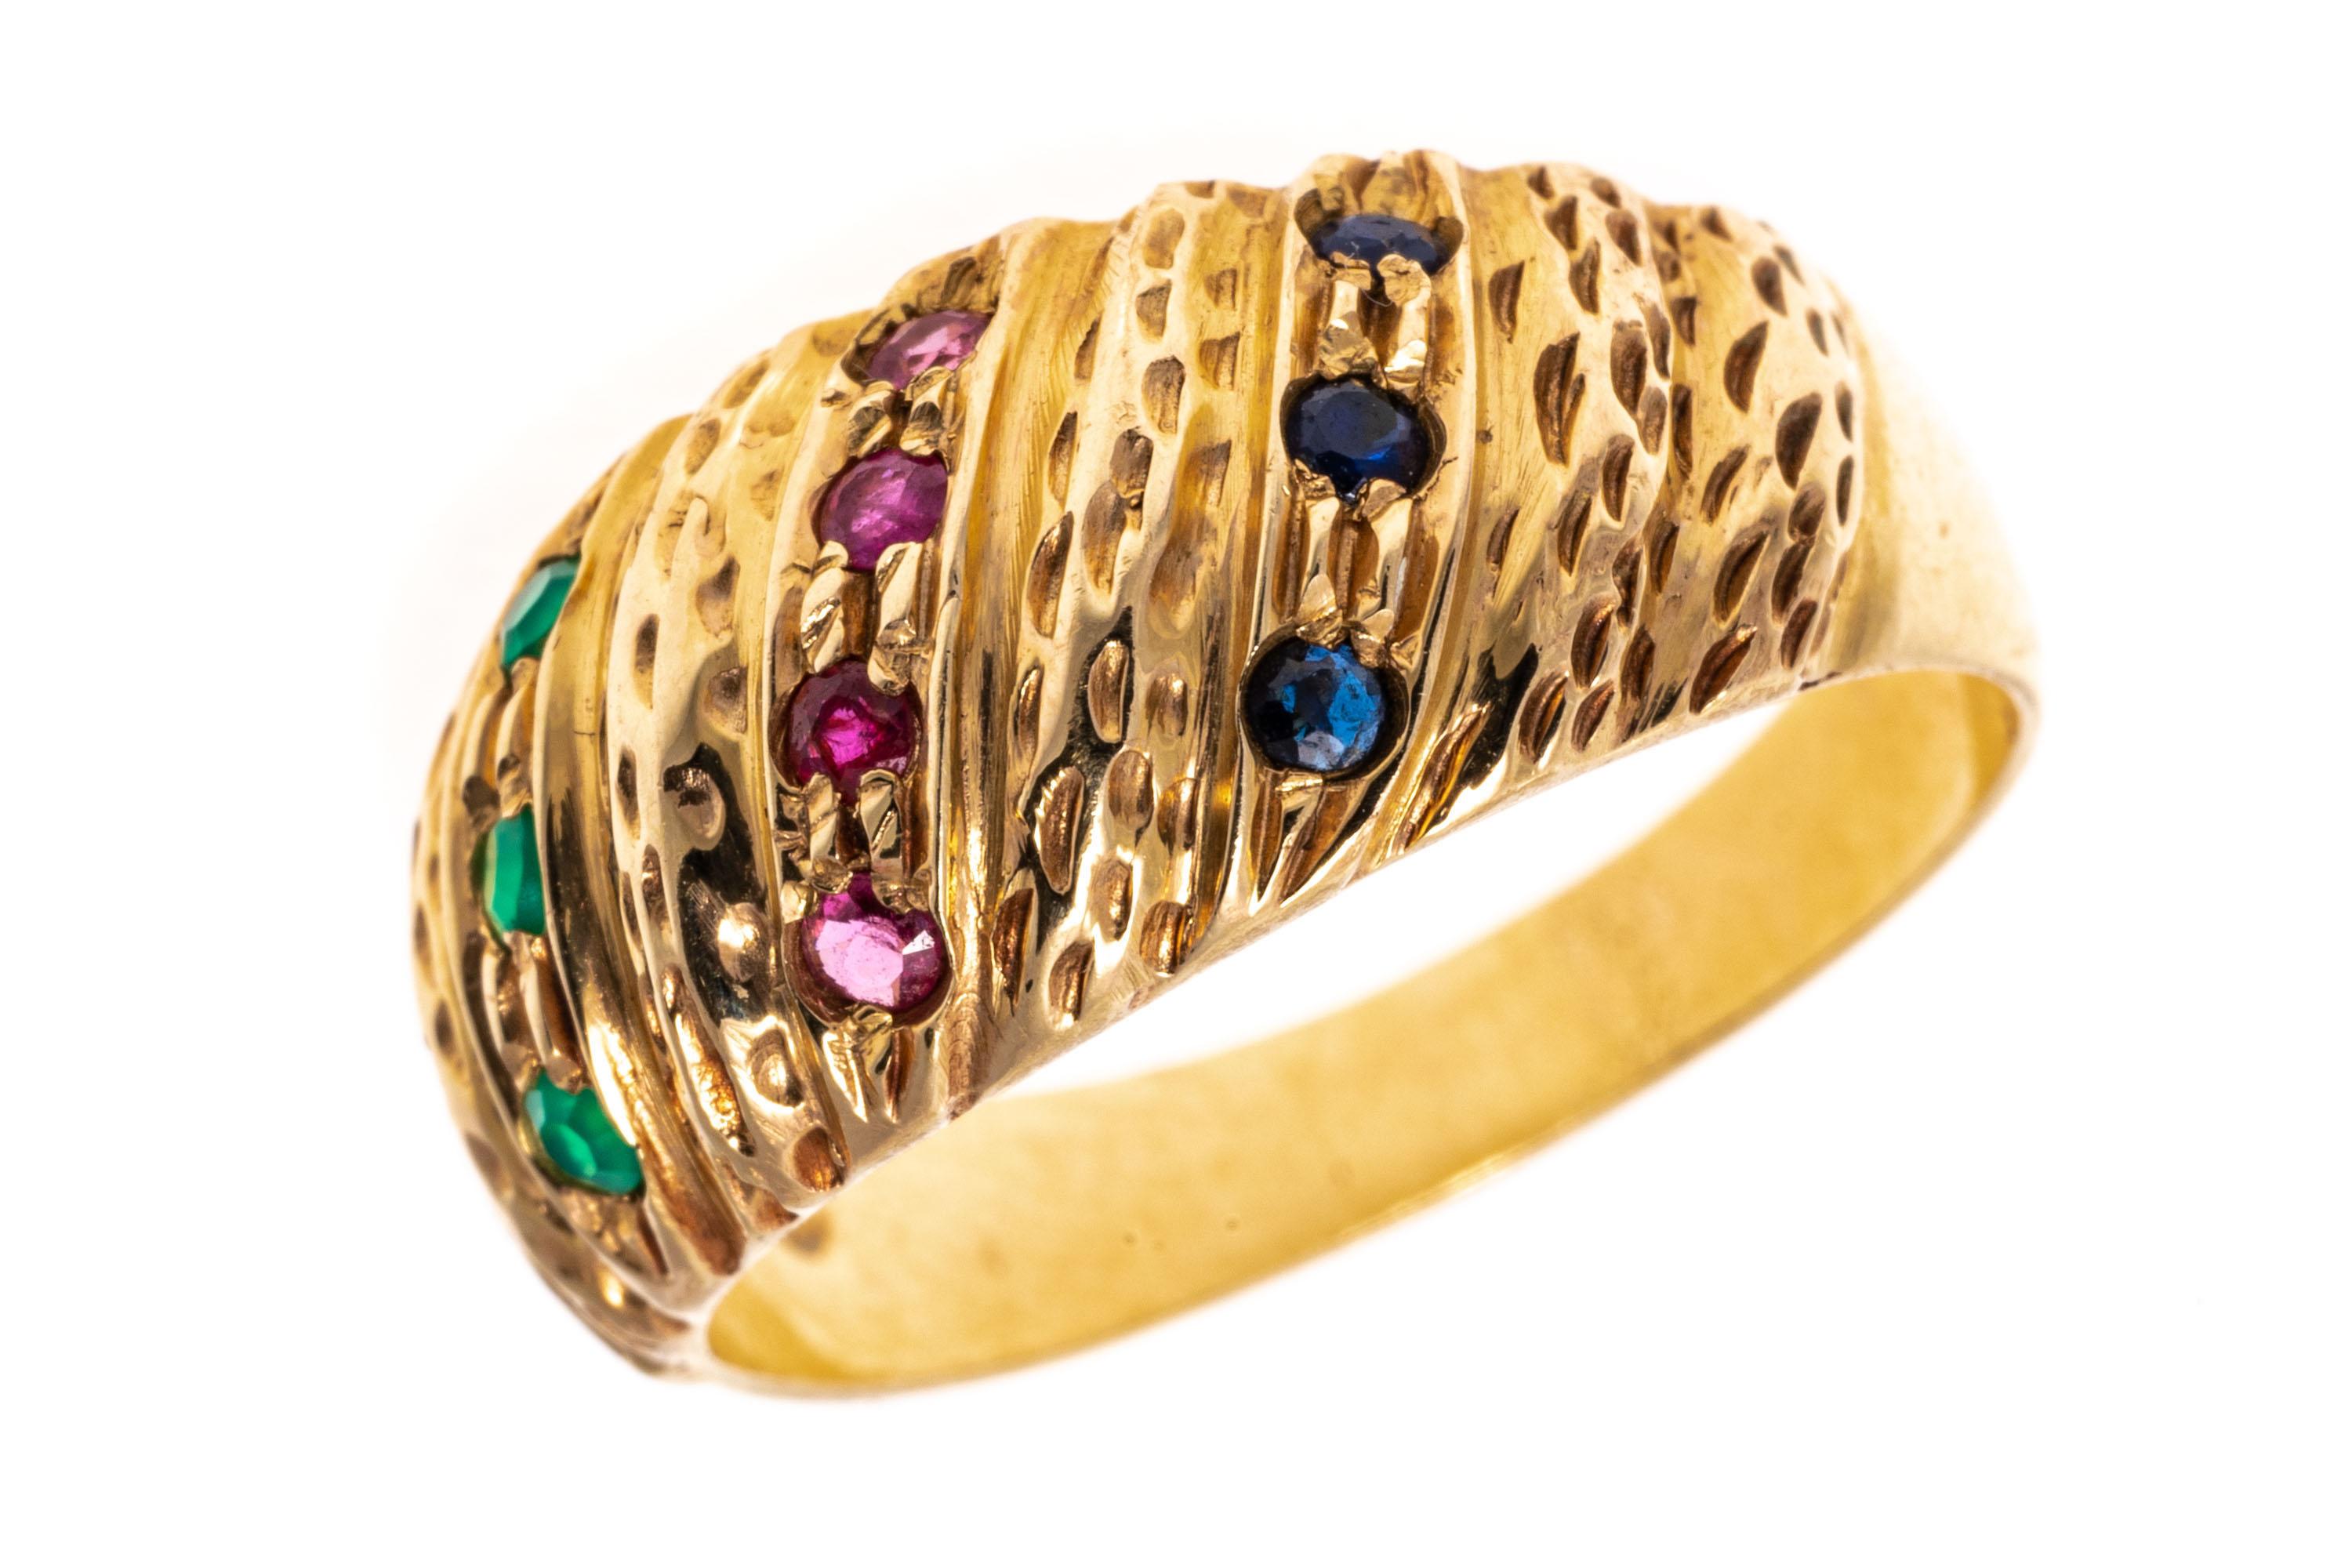 14k Yellow Gold Diagonal Dome Ring with Rubies, Emeralds, Sapphires For Sale 3